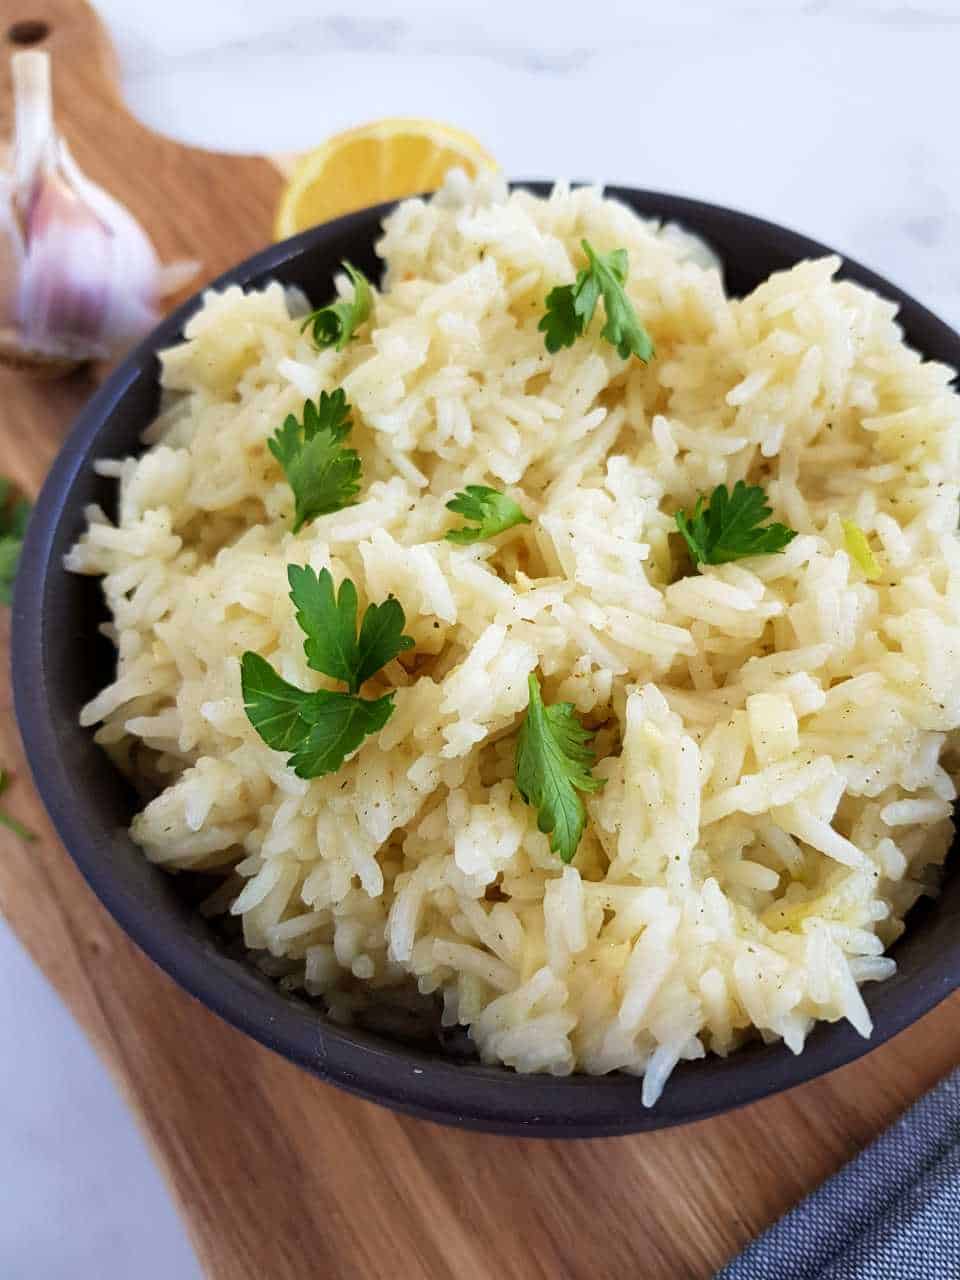 Lemon garlic rice in a black bowl with lemon and garlic in the background.